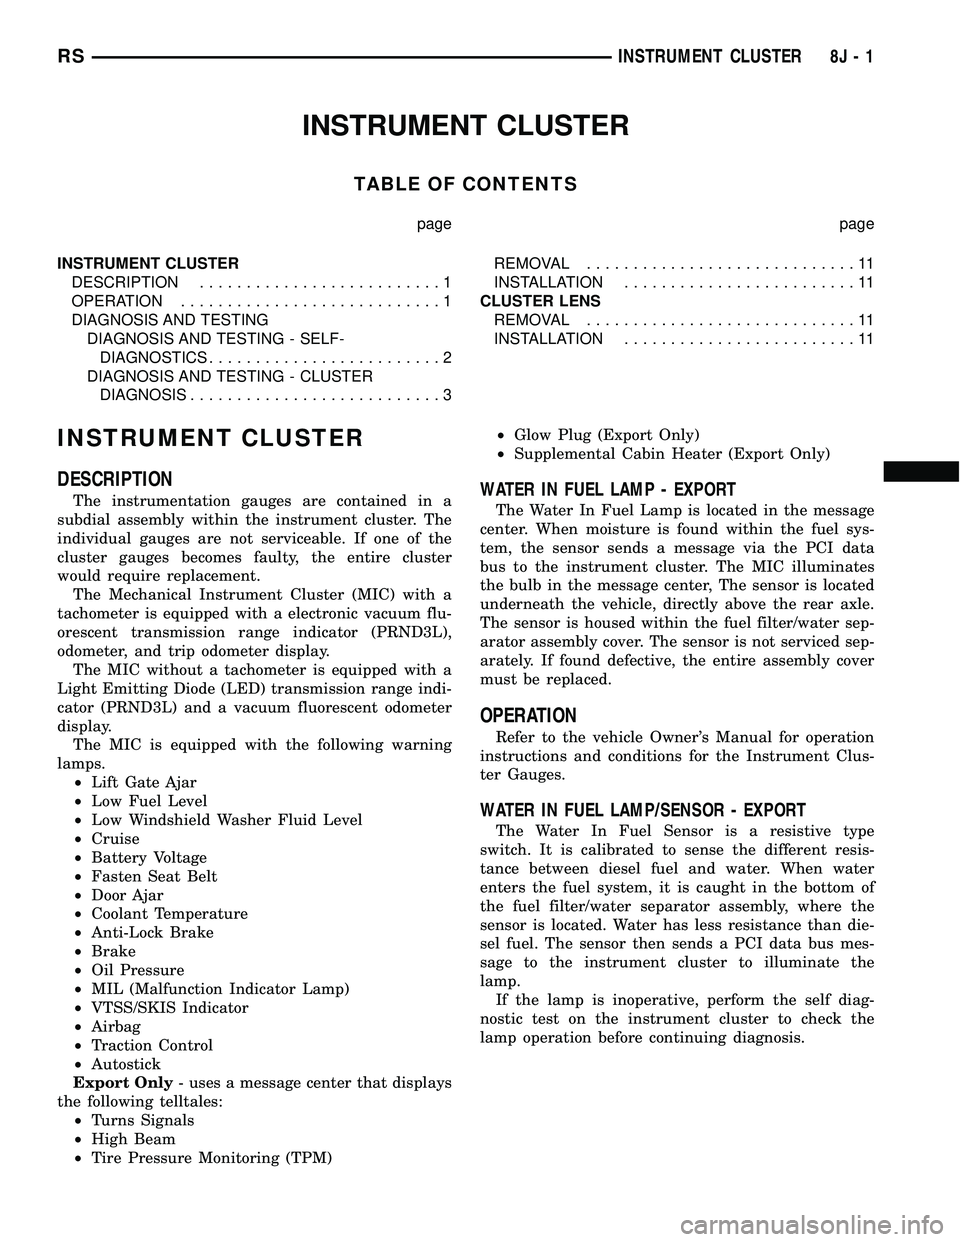 CHRYSLER VOYAGER 2005  Service Manual INSTRUMENT CLUSTER
TABLE OF CONTENTS
page page
INSTRUMENT CLUSTER
DESCRIPTION..........................1
OPERATION............................1
DIAGNOSIS AND TESTING
DIAGNOSIS AND TESTING - SELF-
DIAG